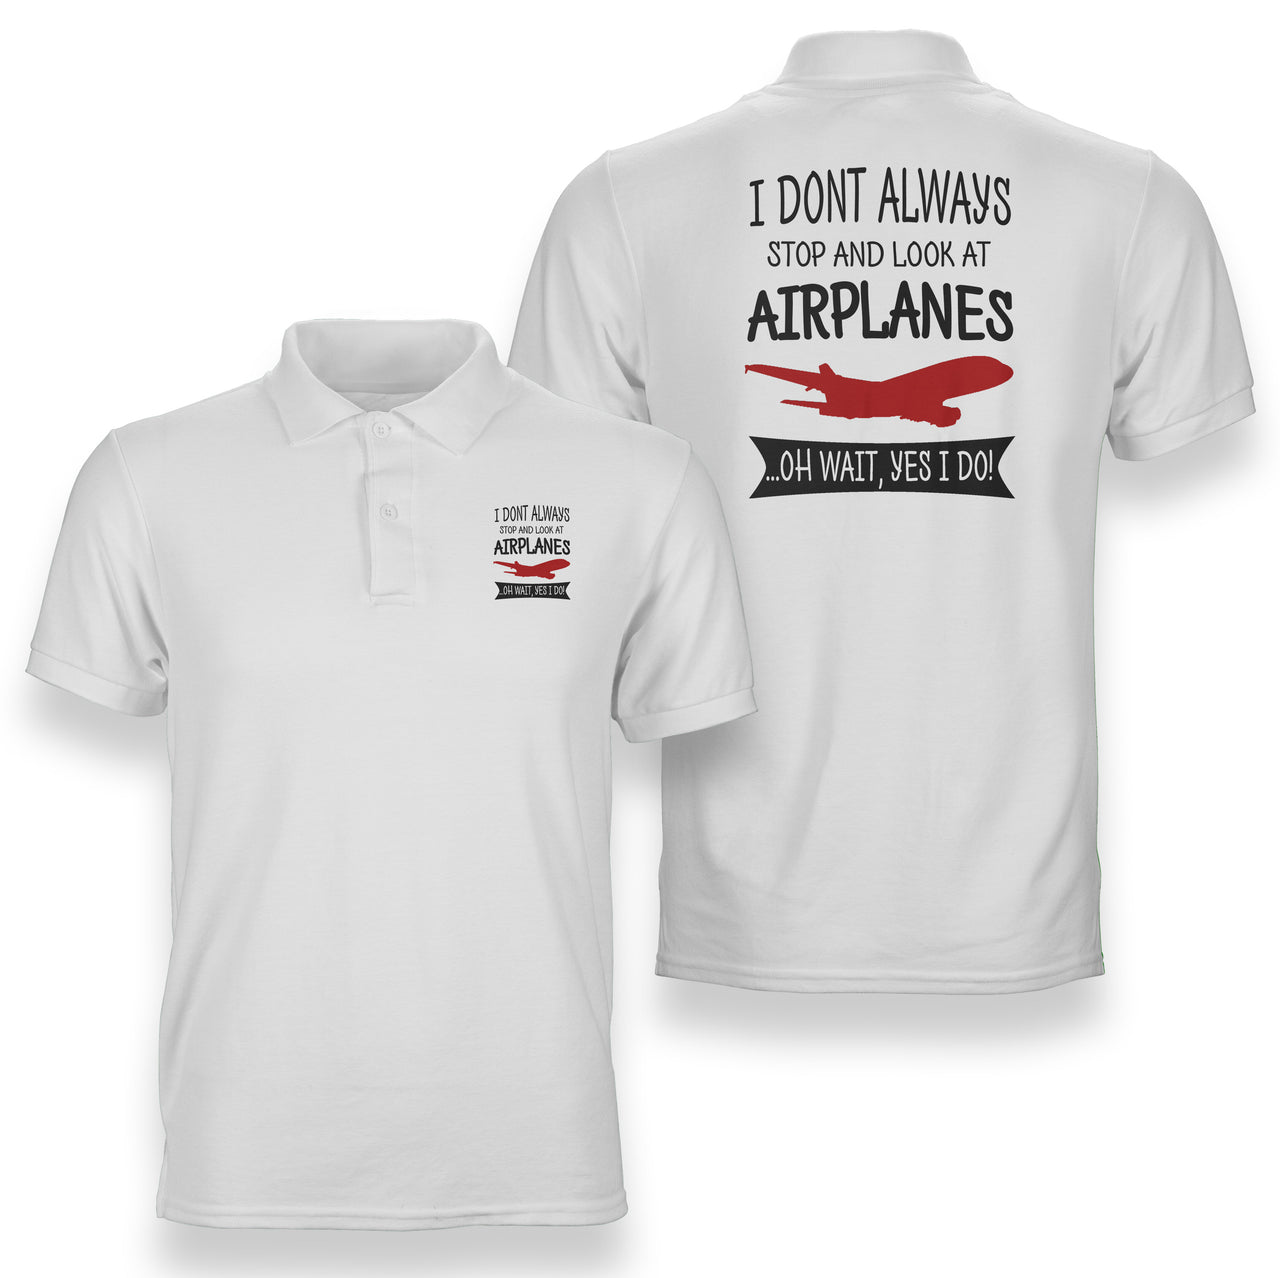 I Don't Always Stop and Look at Airplanes Designed Double Side Polo T-Shirts